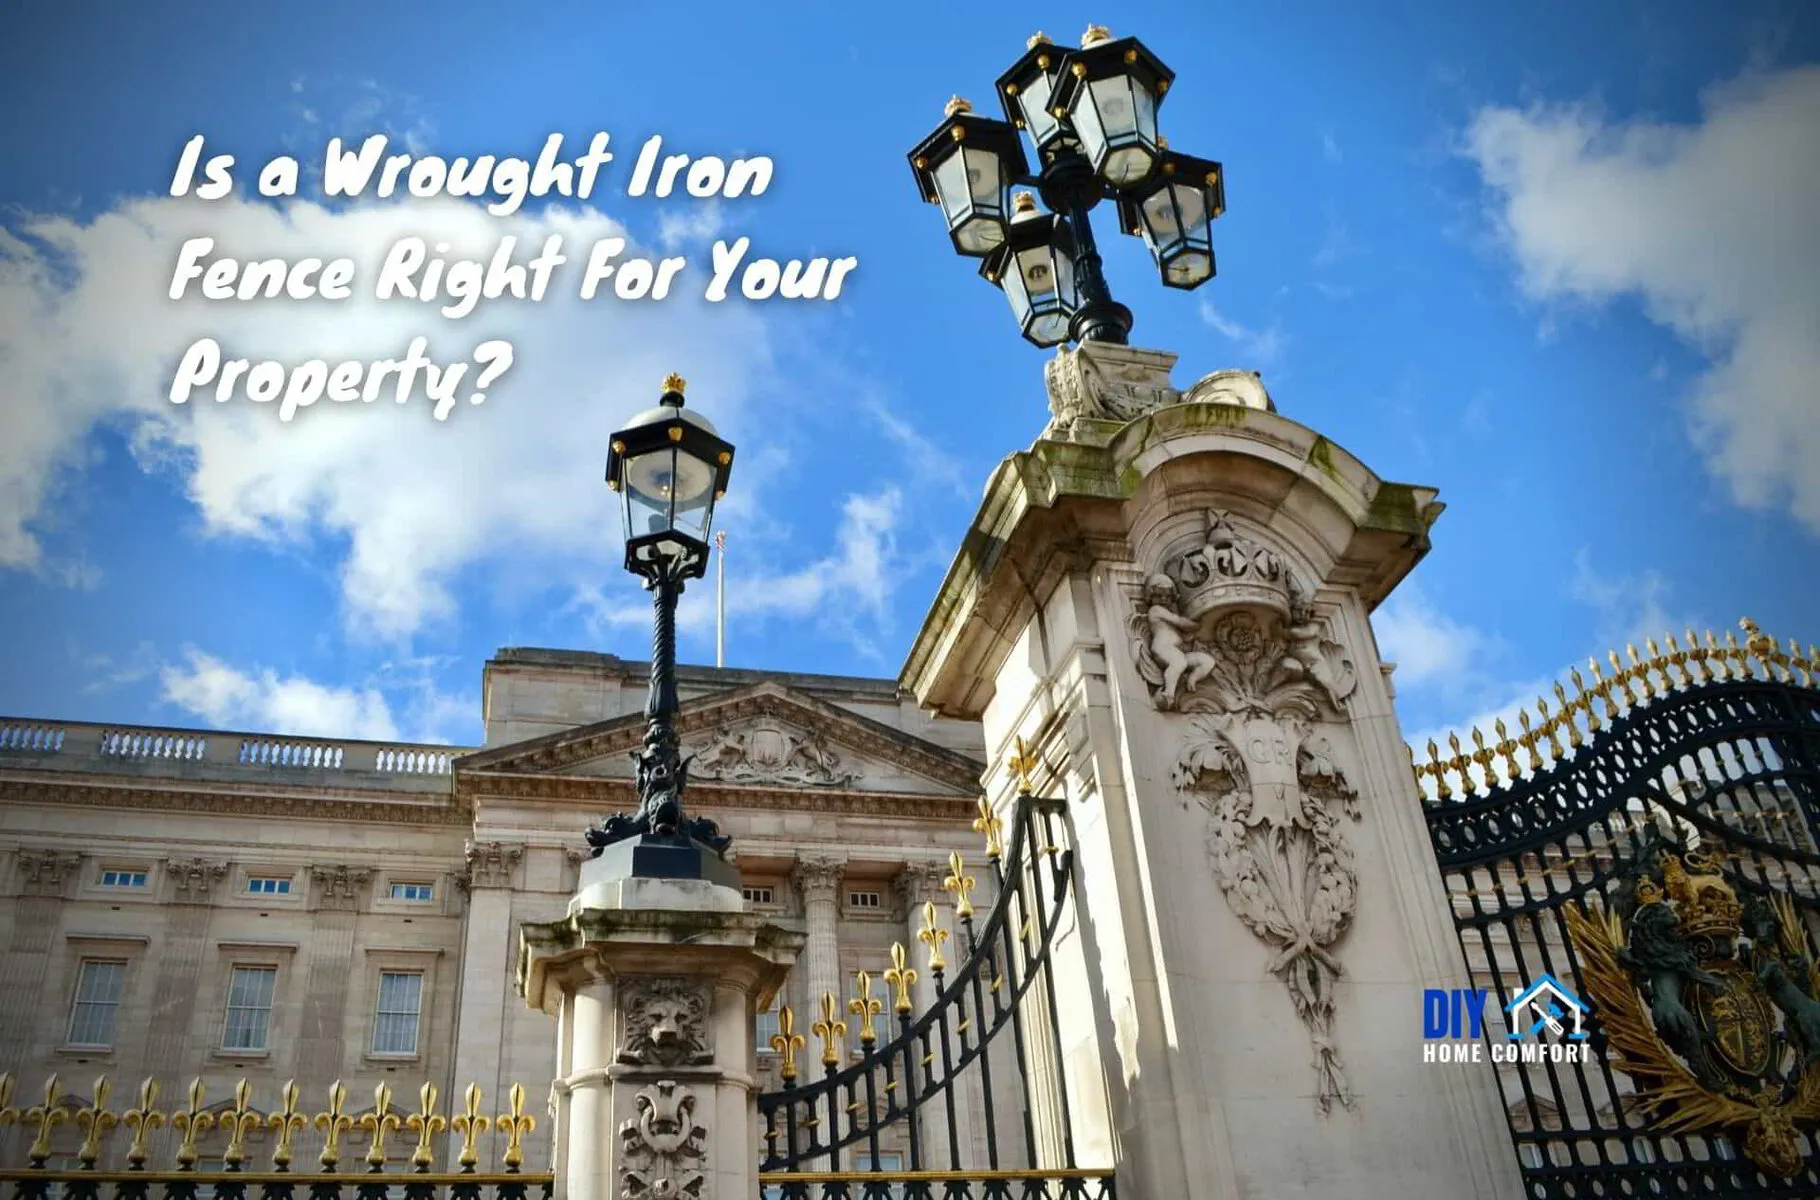 Is a Wrought Iron Fence Right For Your Property? | DIY Home Comfort